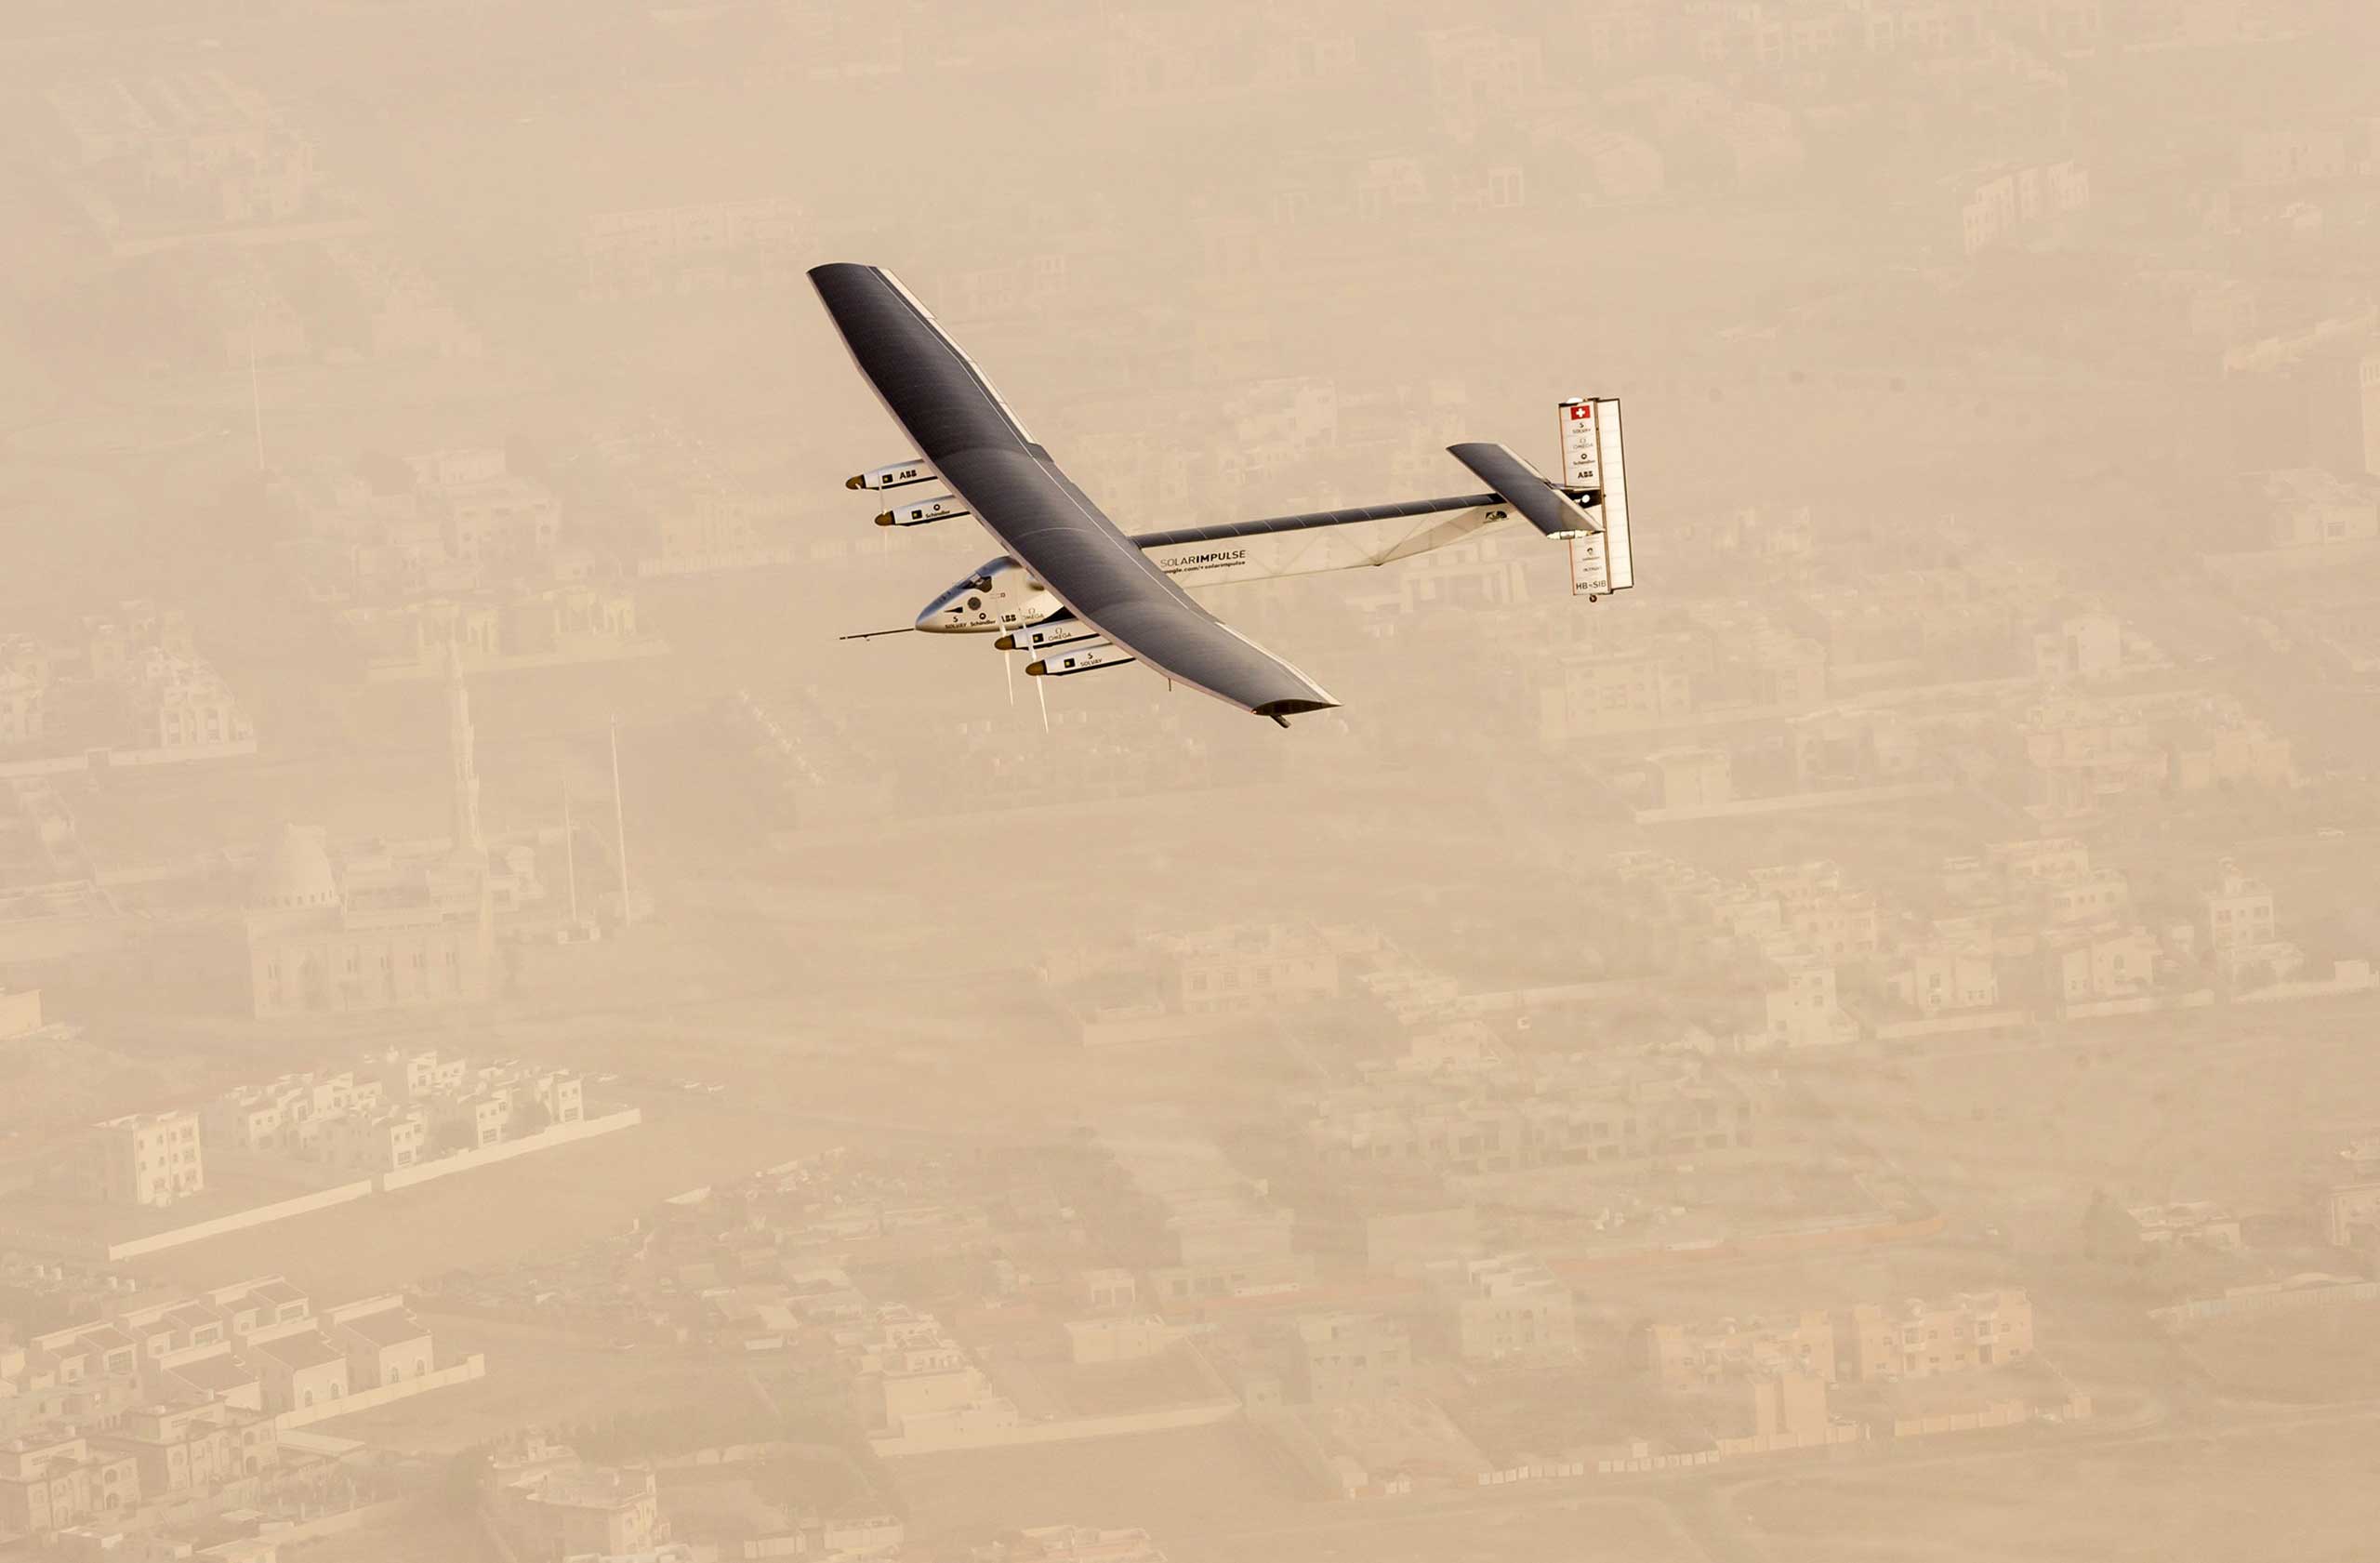 Solar Impulse 2, a solar-powered airplane, takes flight as it begins its historic round-the-world journey from Al Bateen Airport in Abu Dhabi on March 9, 2015. (Jean Revillard—Getty Images)